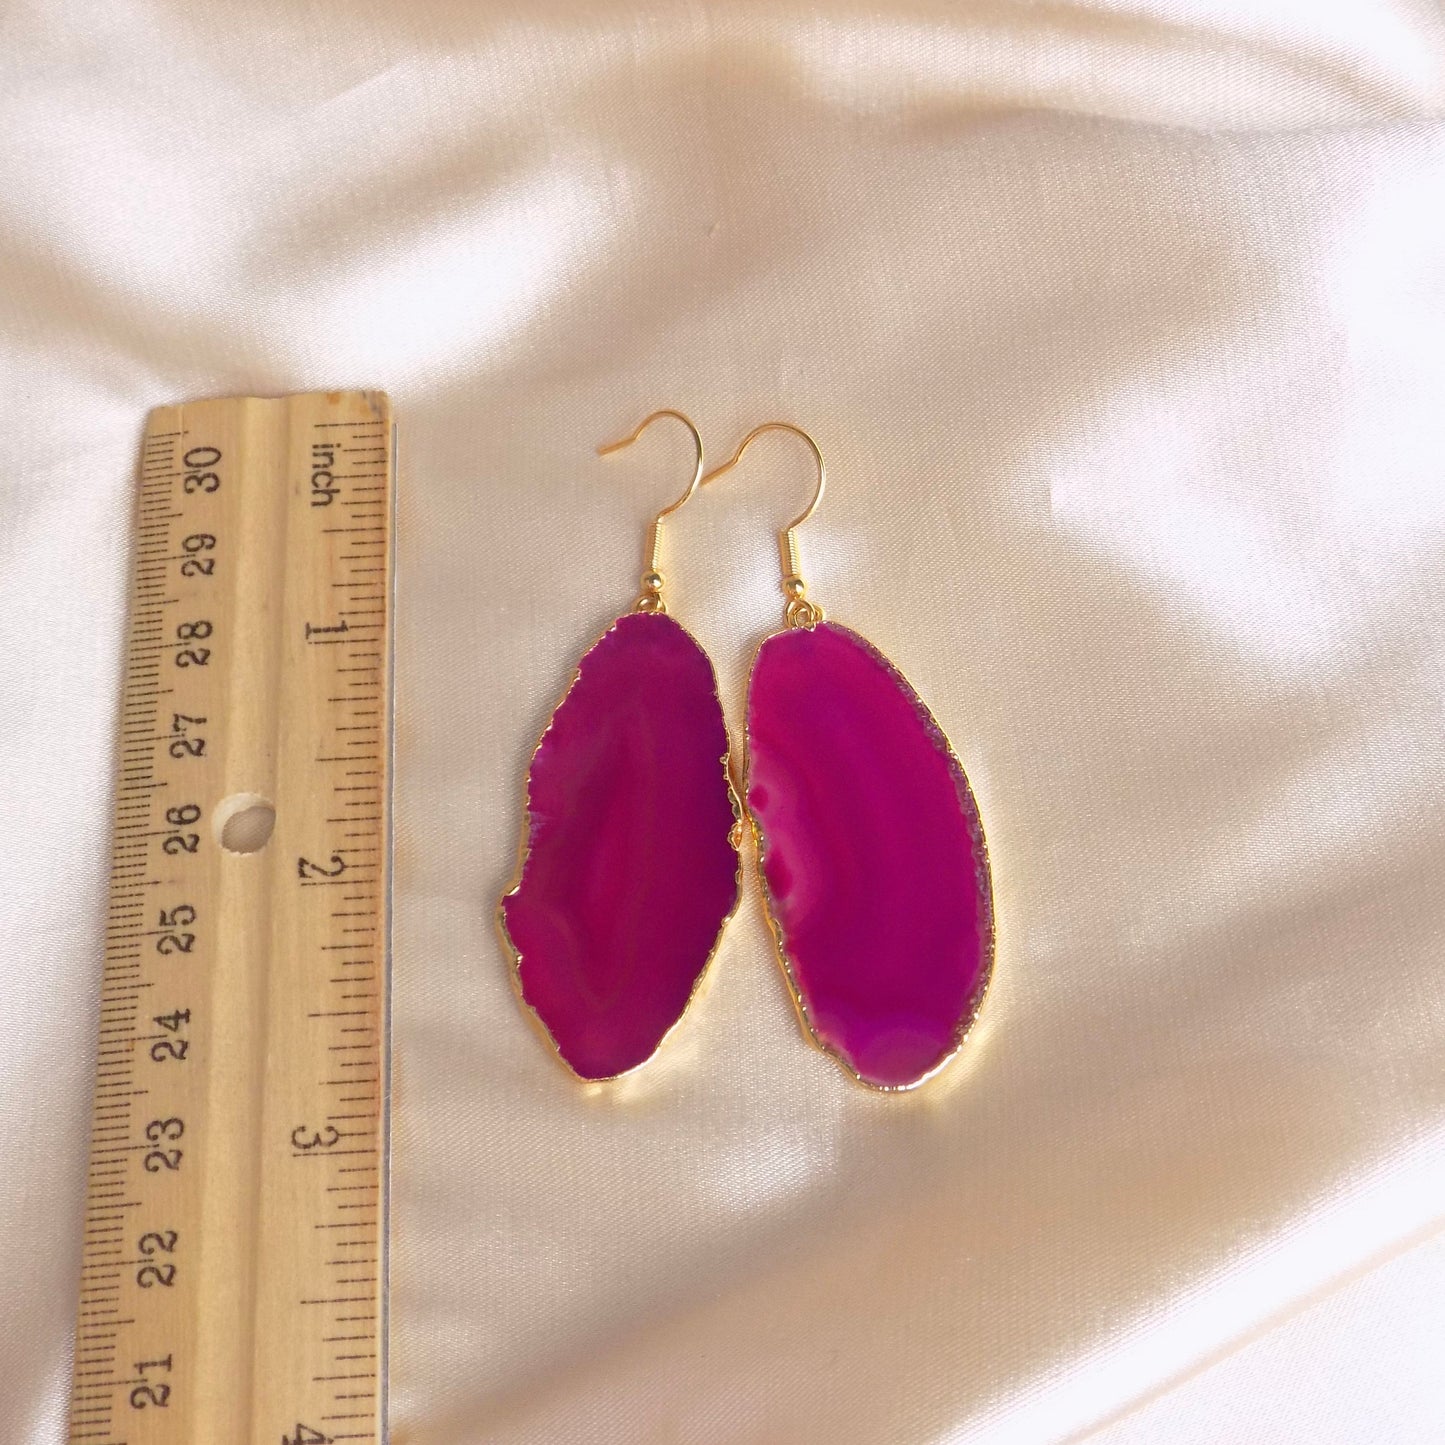 Hot Pink Agate Earrings, Large Statement Jewelry, Christmas Gifts Women, G15-145